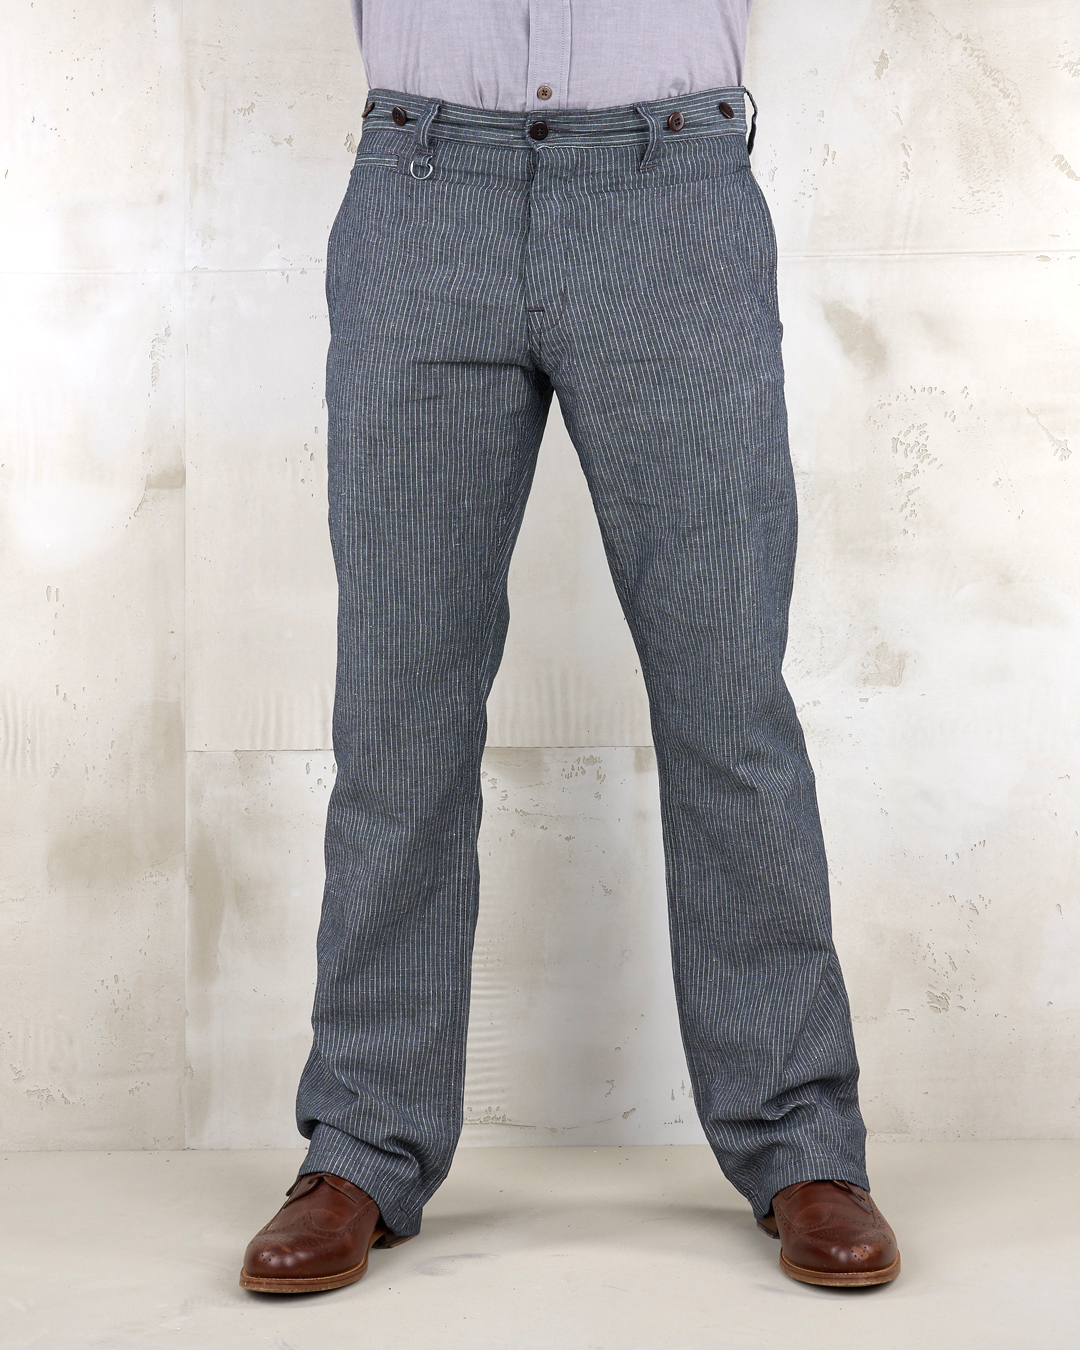 1942 Hunting Pant grey striped linen